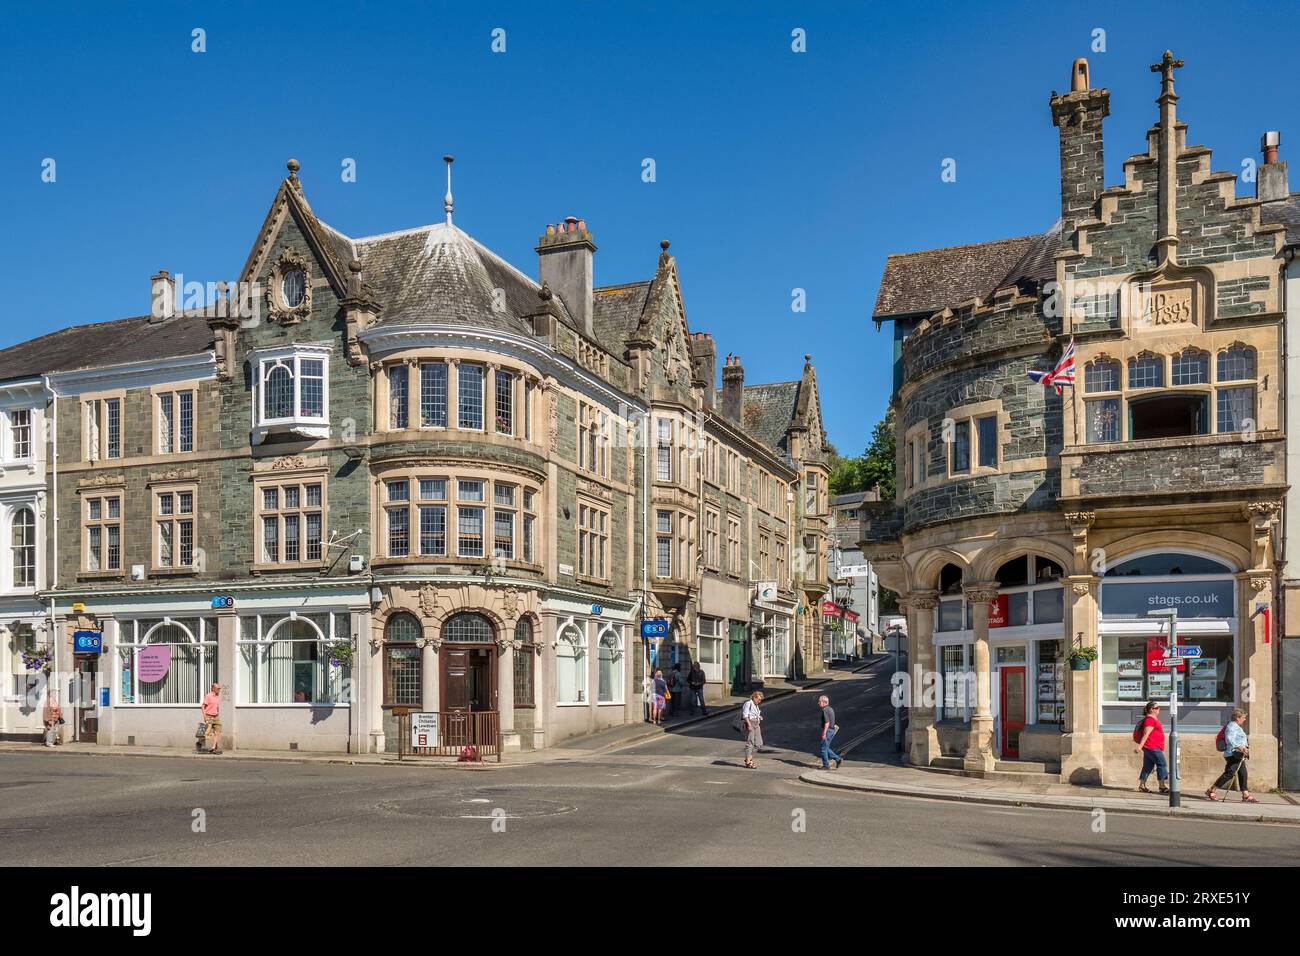 2 June 2023: Tavistock, Devon, UK - Beautiful old buildings in Bedford Square, on a summer day with deep blue sky. A lasting reflection of the great... Stock Photo